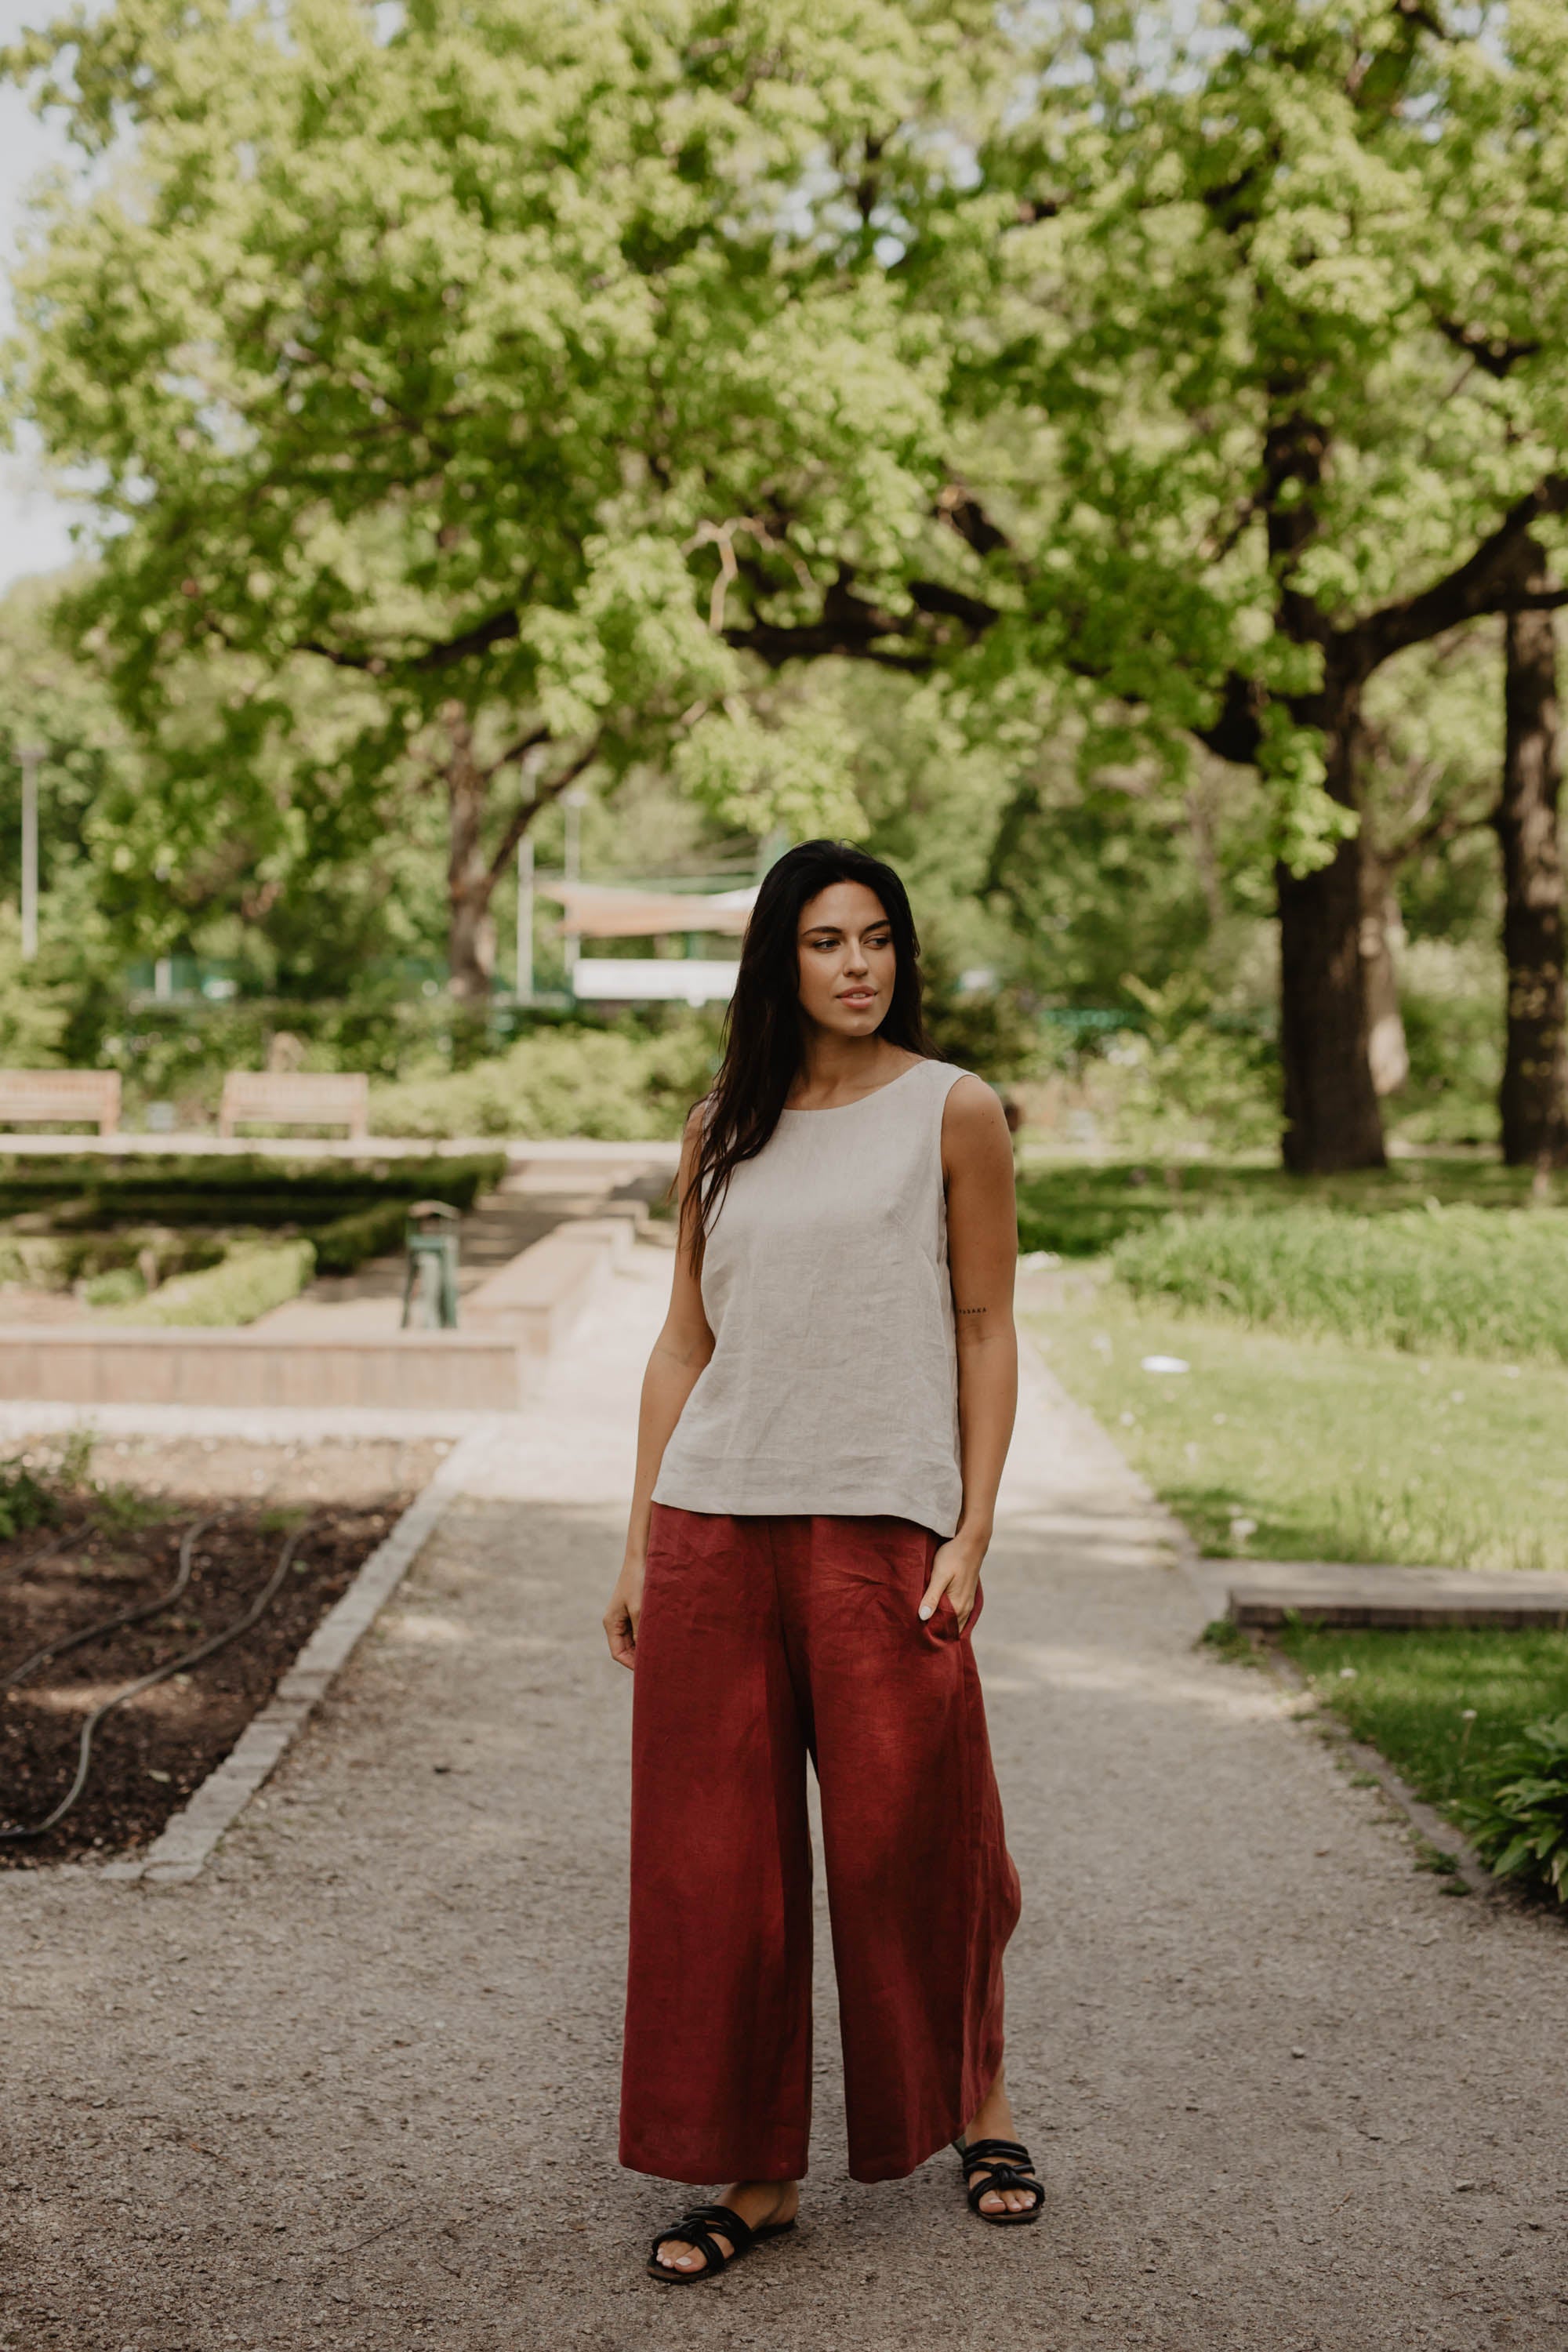 Woman In Park Wearing Wide Red Linen Pants and White Linen Top